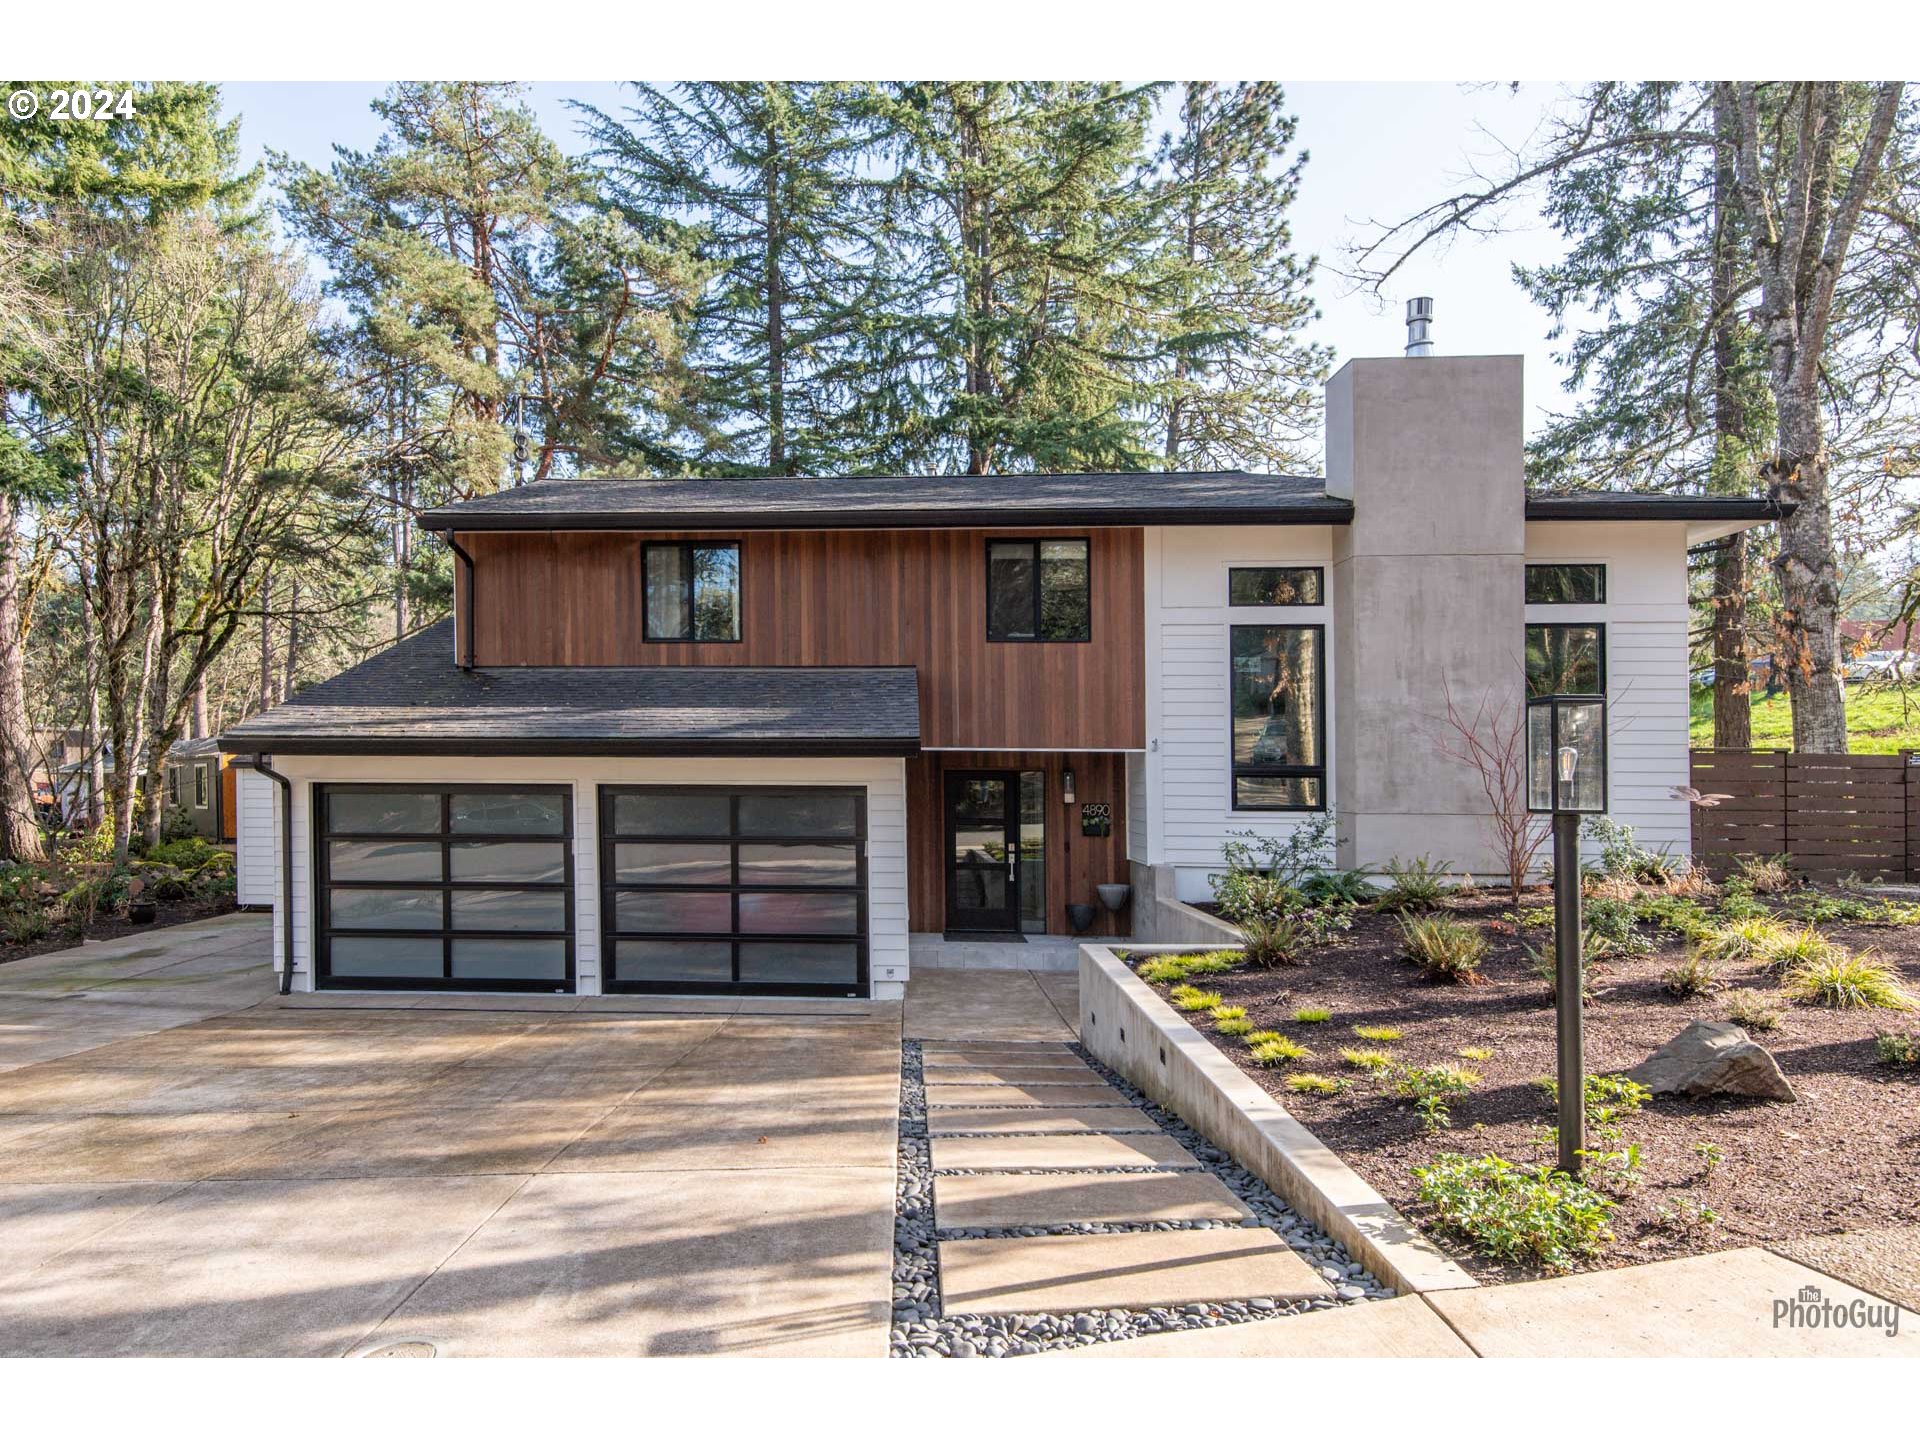 4890 MAHALO DR, Eugene, OR 